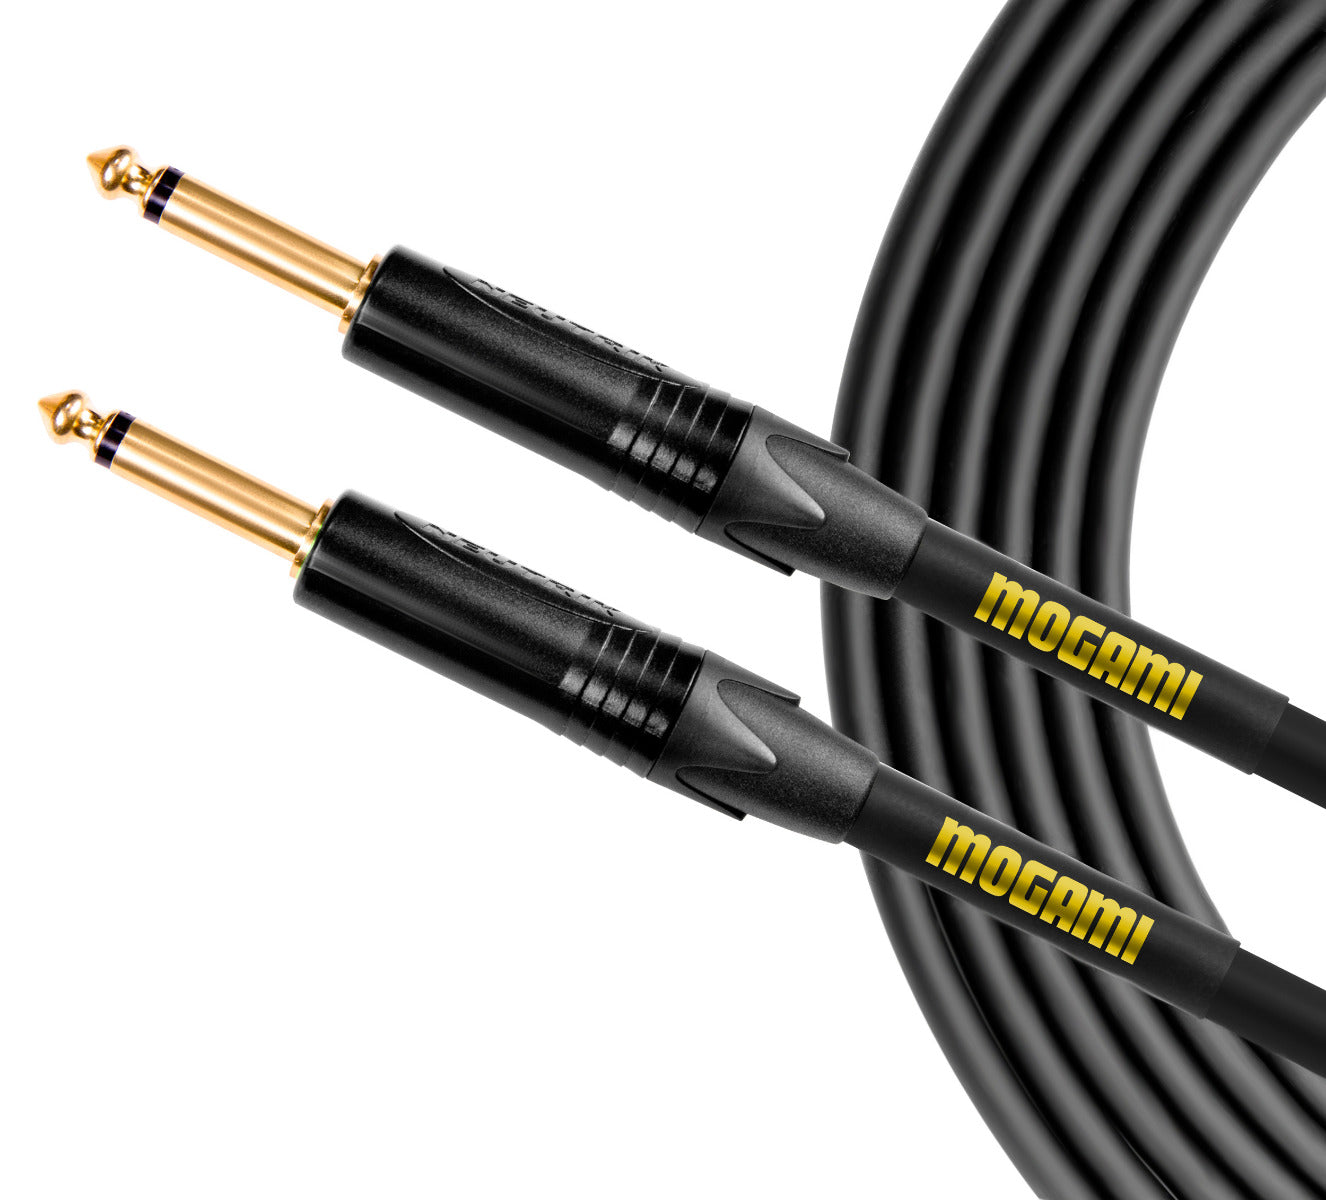 Mogami Gold Instrument Cable - 10'